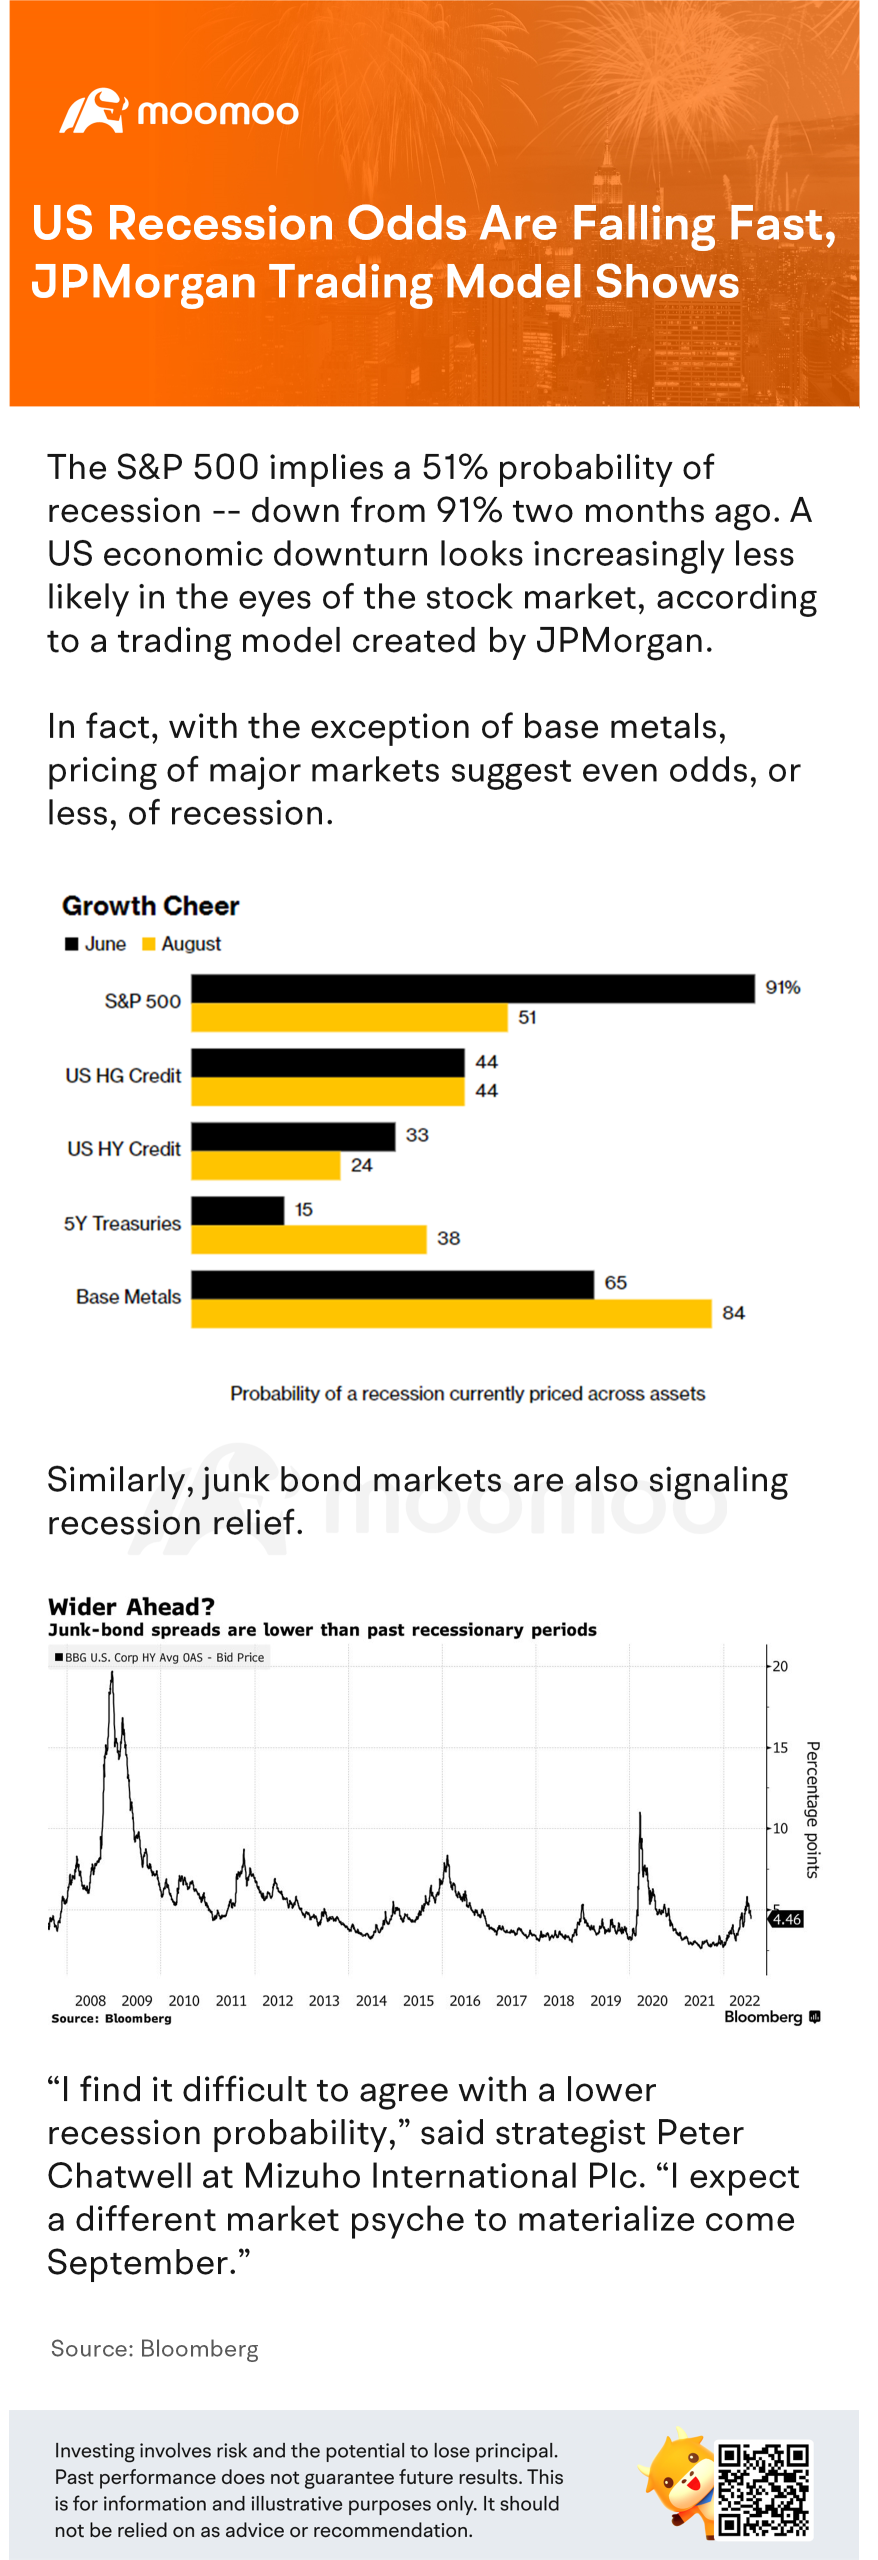 US recession odds are falling fast, JPMorgan trading model shows